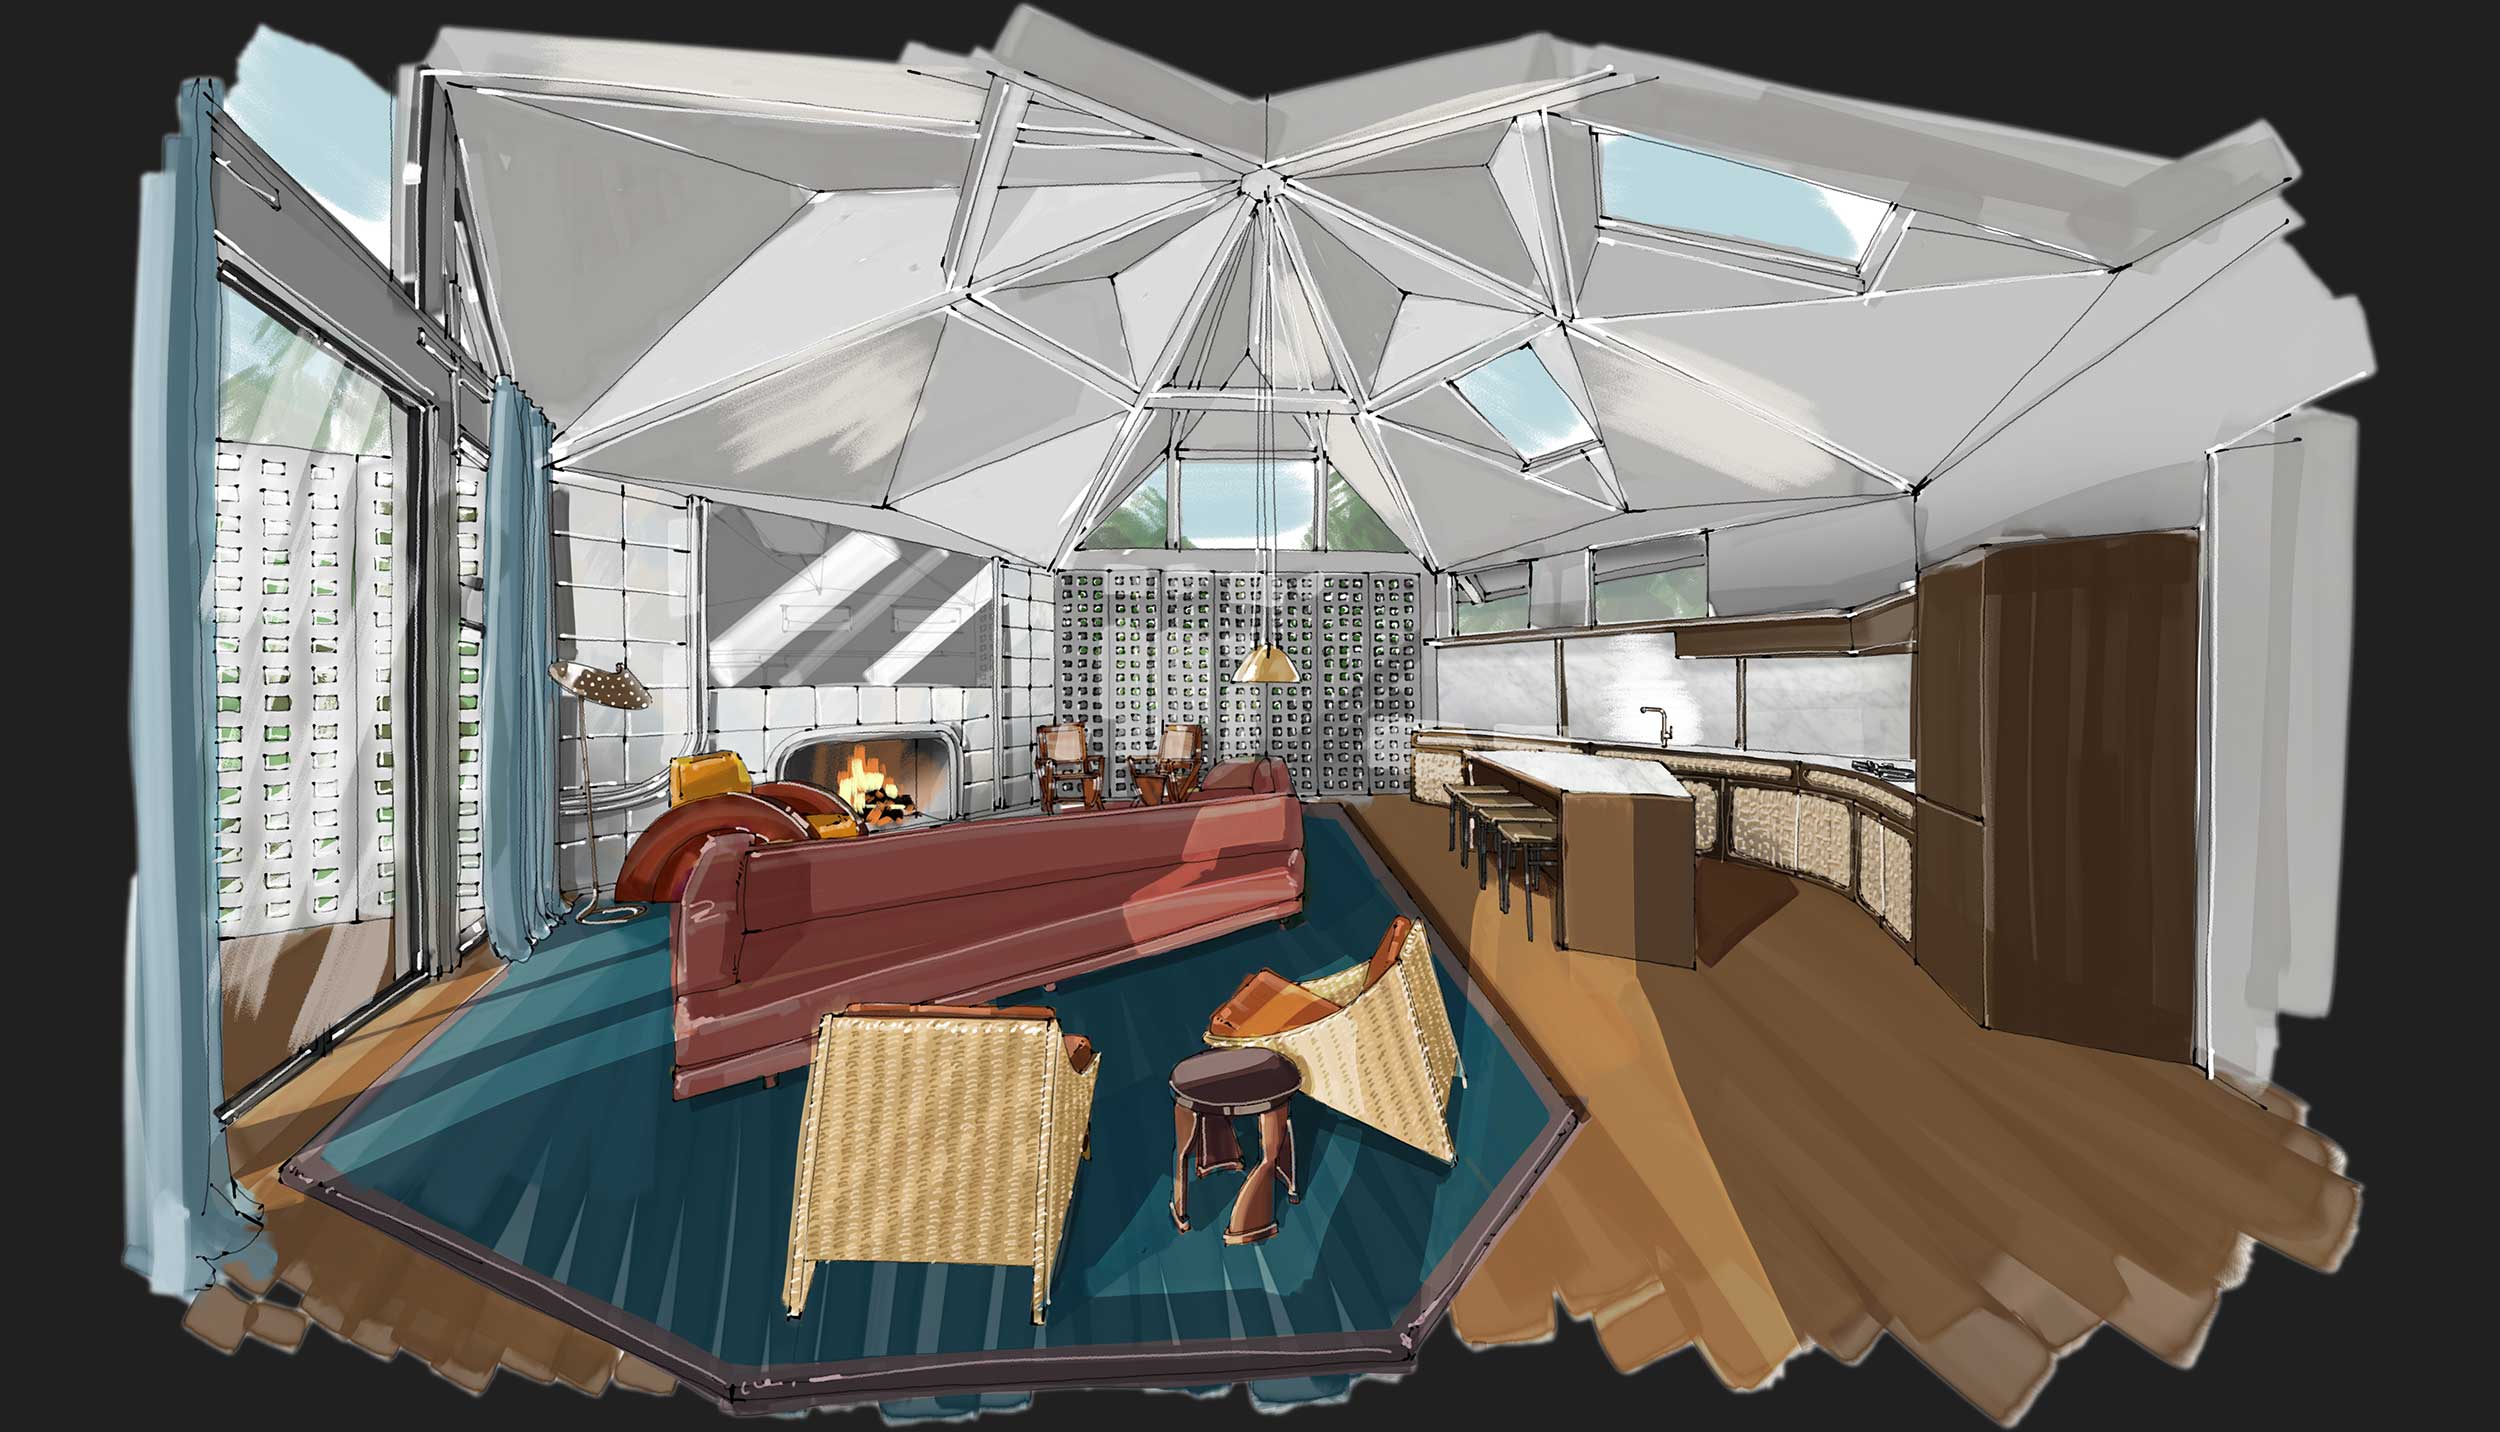 Colorful hand-drawn rendering of expansive lounge room with white geometric-patterned ceiling